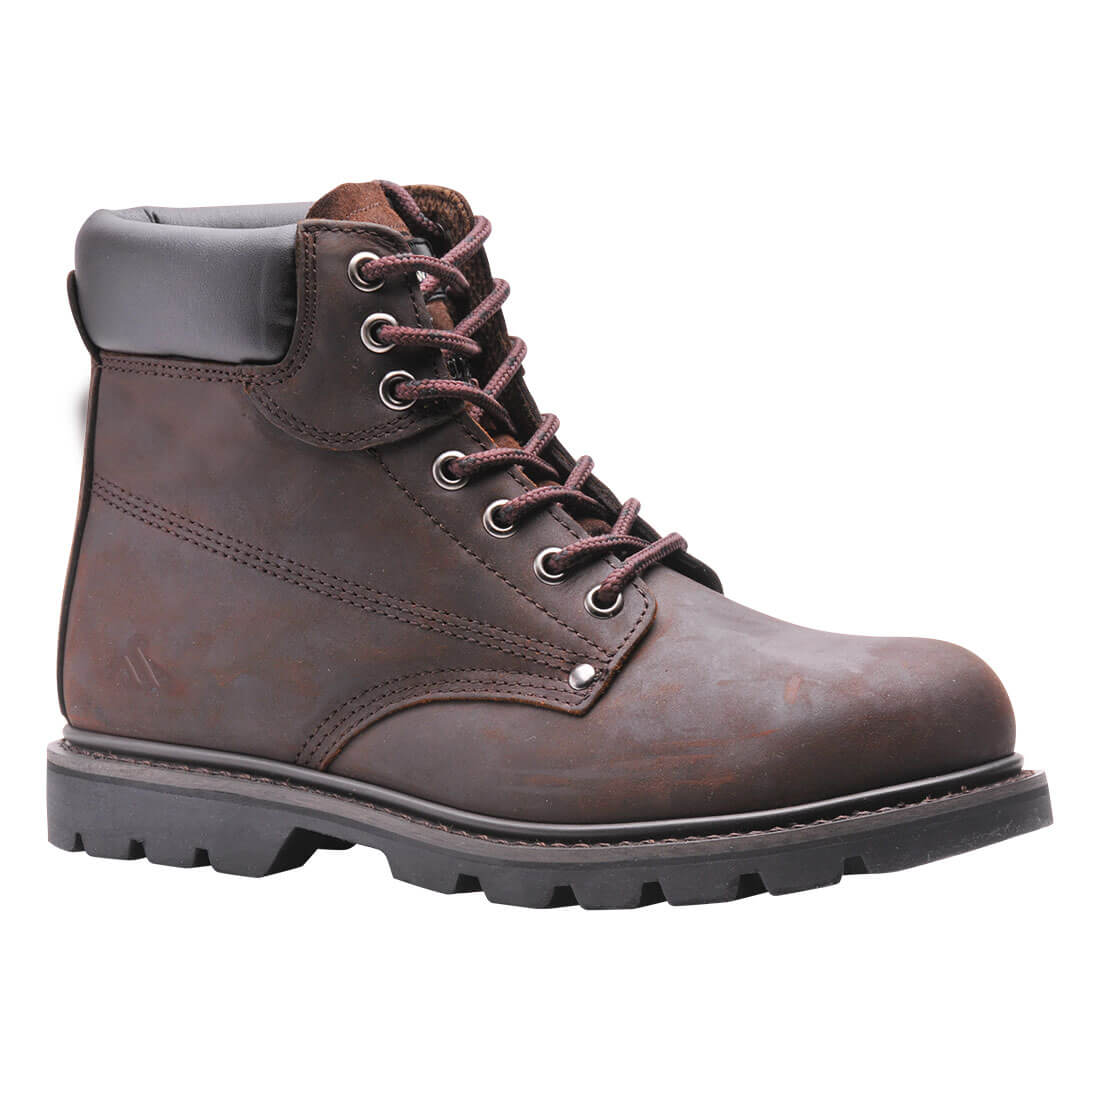 FW17 Steelite Welted Safety Boot SB HRO Brown